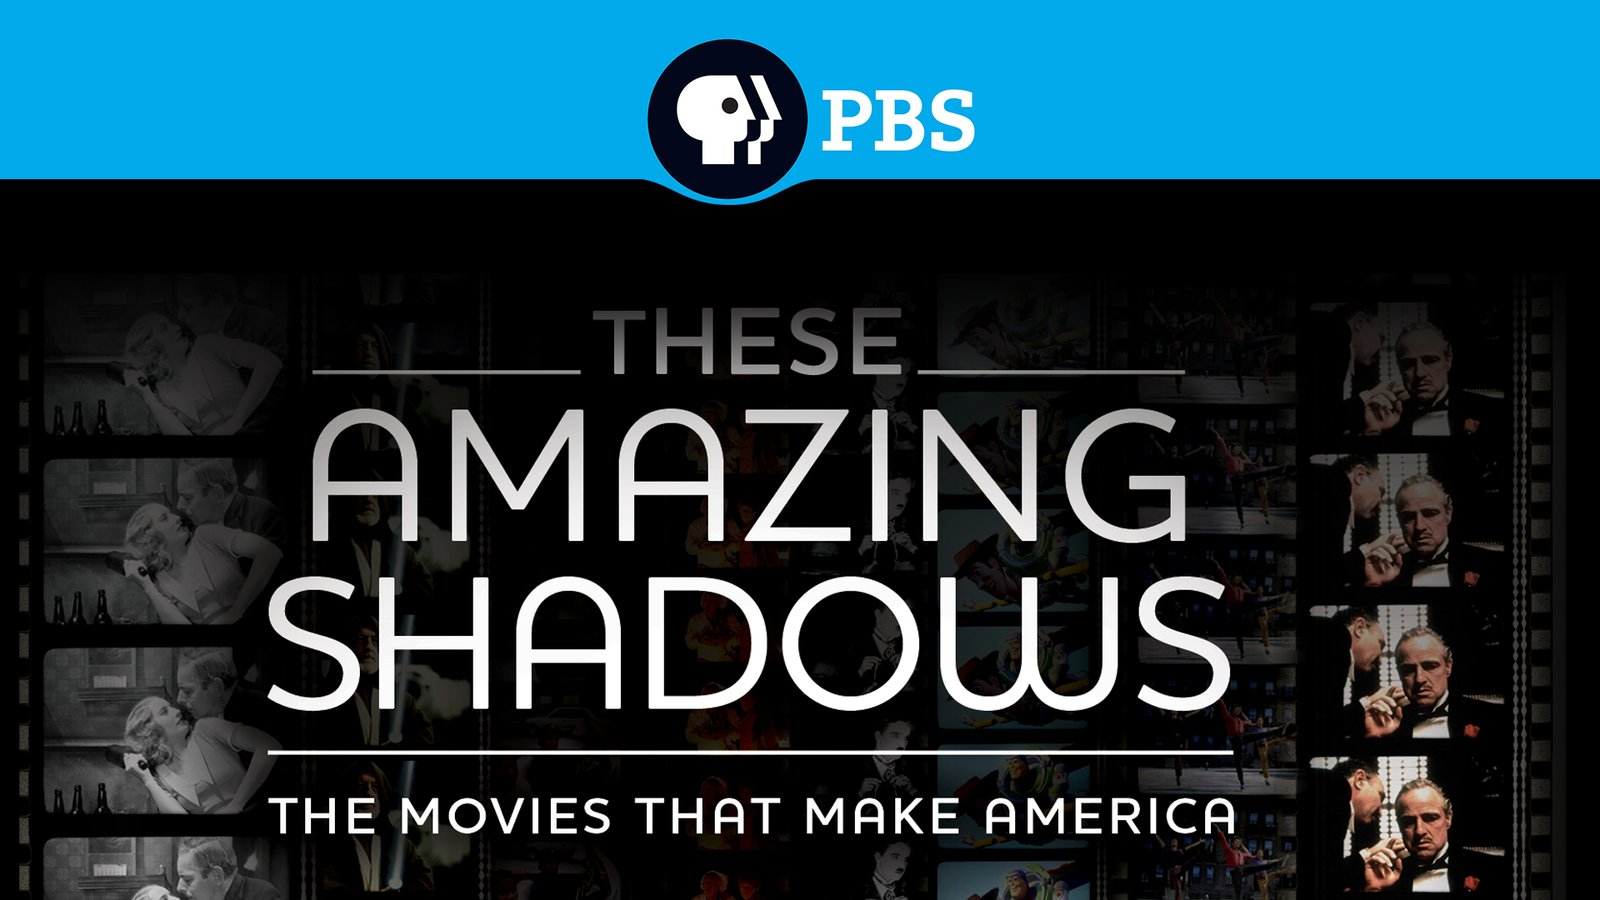 These Amazing Shadows - The Movies That Make America